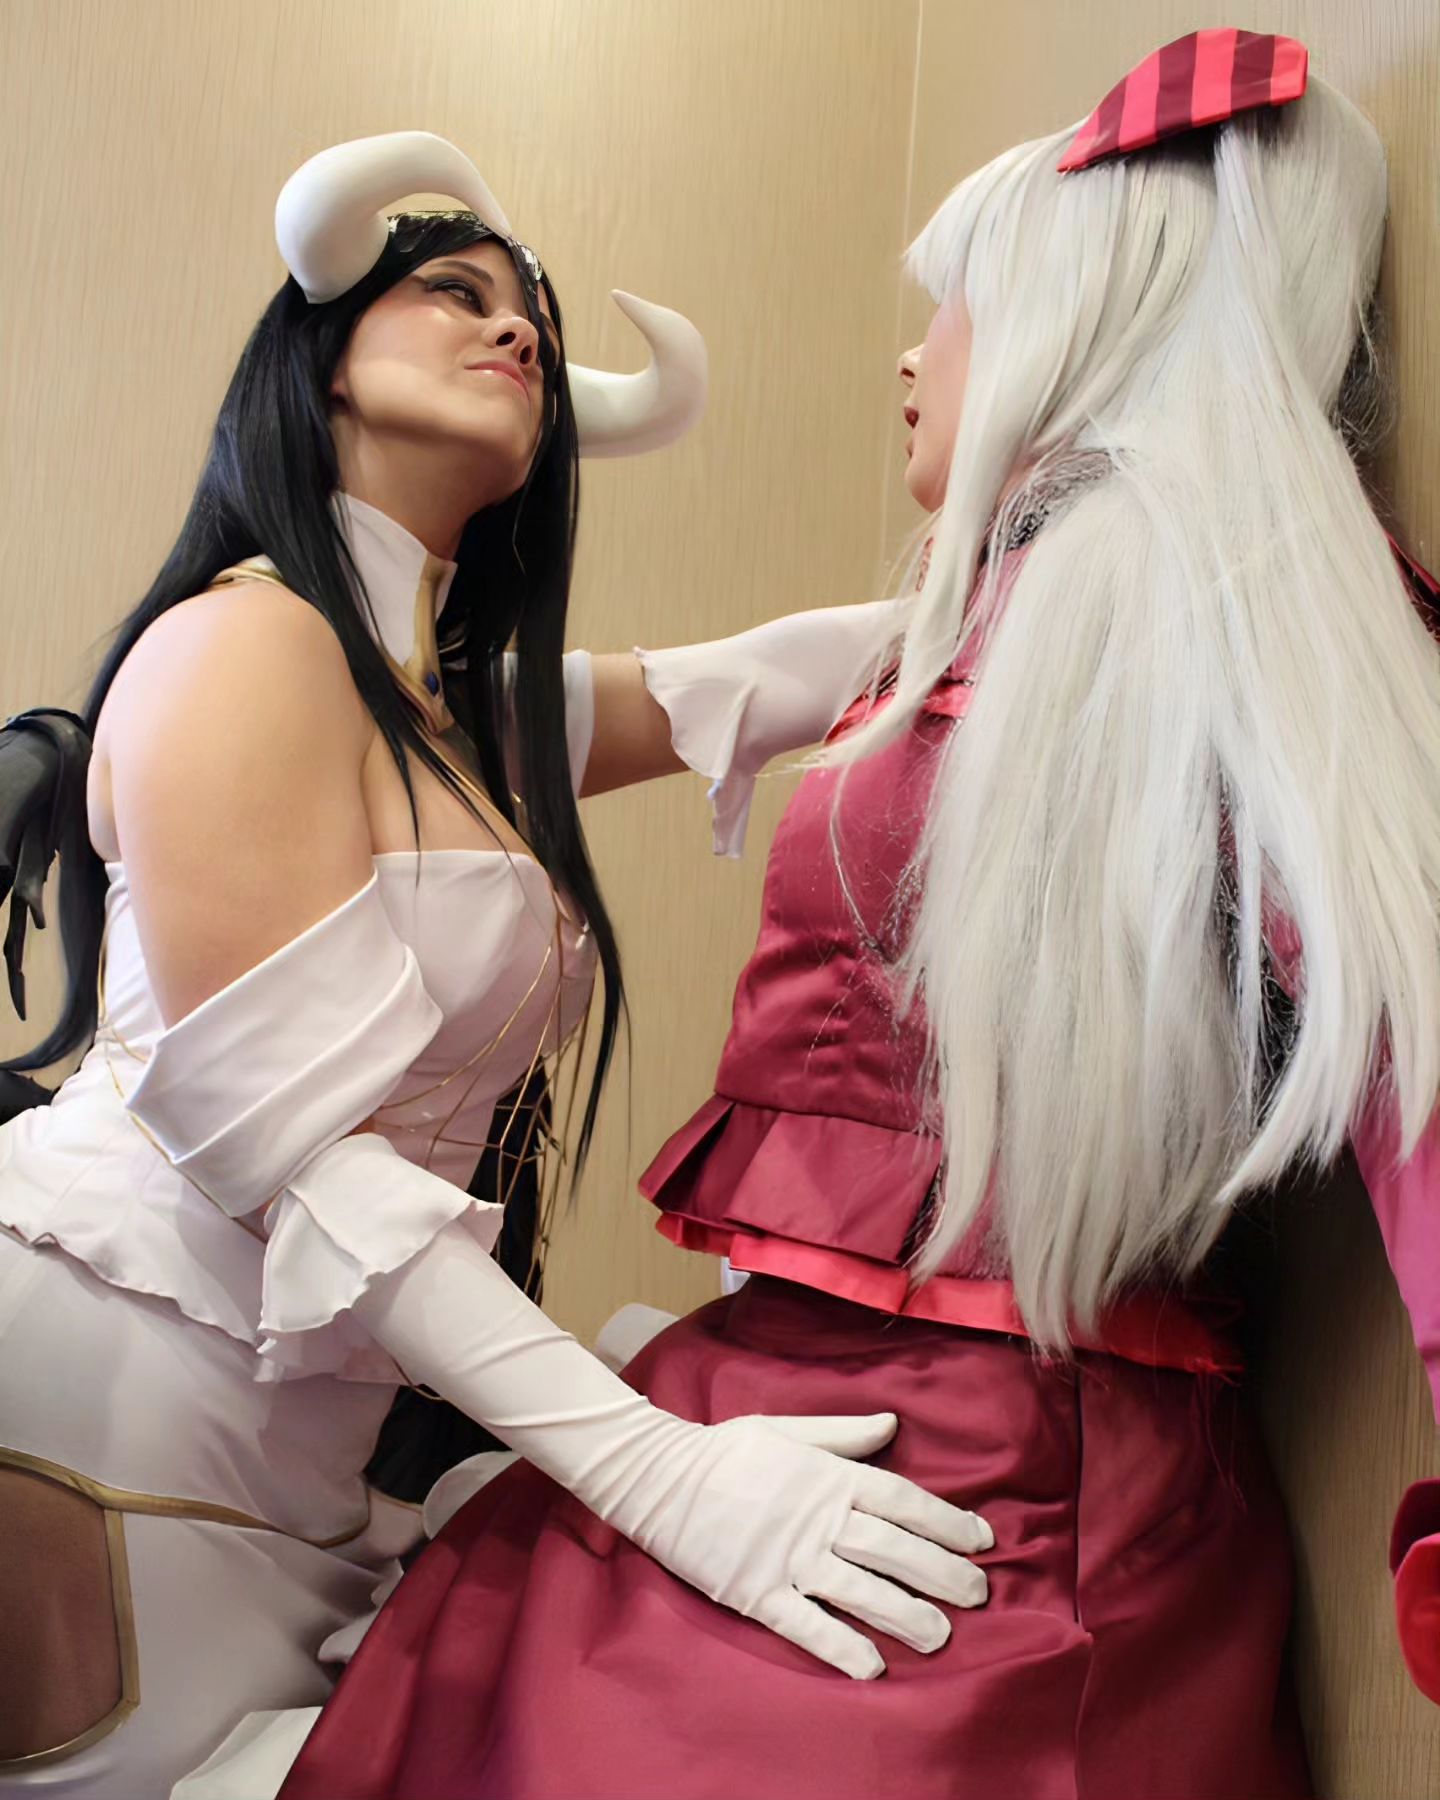 What do you think Albedo is going to say to Shalltear?

Shalltear - @playingwithtnt
📸 - @bigspen87

#sexysaturdays #shalltear #shalltearcosplay #ichibancon2024 #con #anime #albedocosplay #albedooverlord #overlordcosplay #overlordcosplay #animegirl #animecosplay #manga #mangacosplay #weeb #weekday #cosplayers #cosplayphoto #sexycosplaygirl #photoshoot #saturdaymorning #saturdayvibes #satisfying